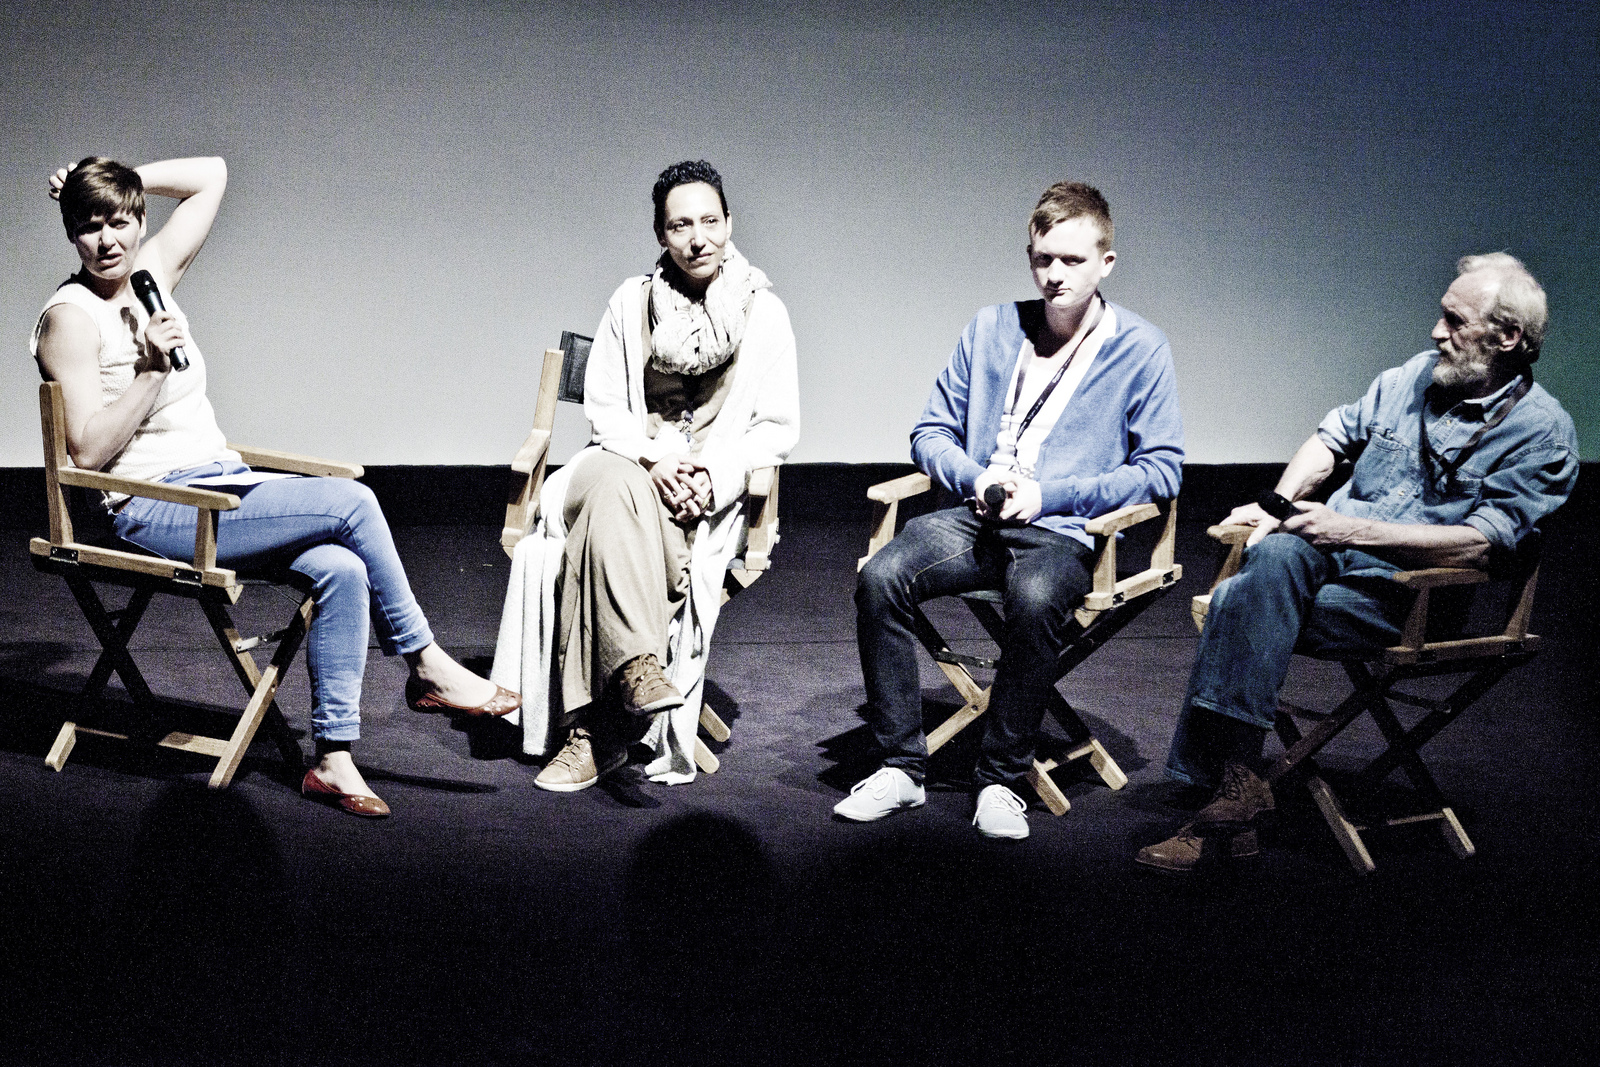 Picture of Fredrik Nielsen, Vanja Larsen And Espen Thorstenson. Q&A after screening of The Red Apple.